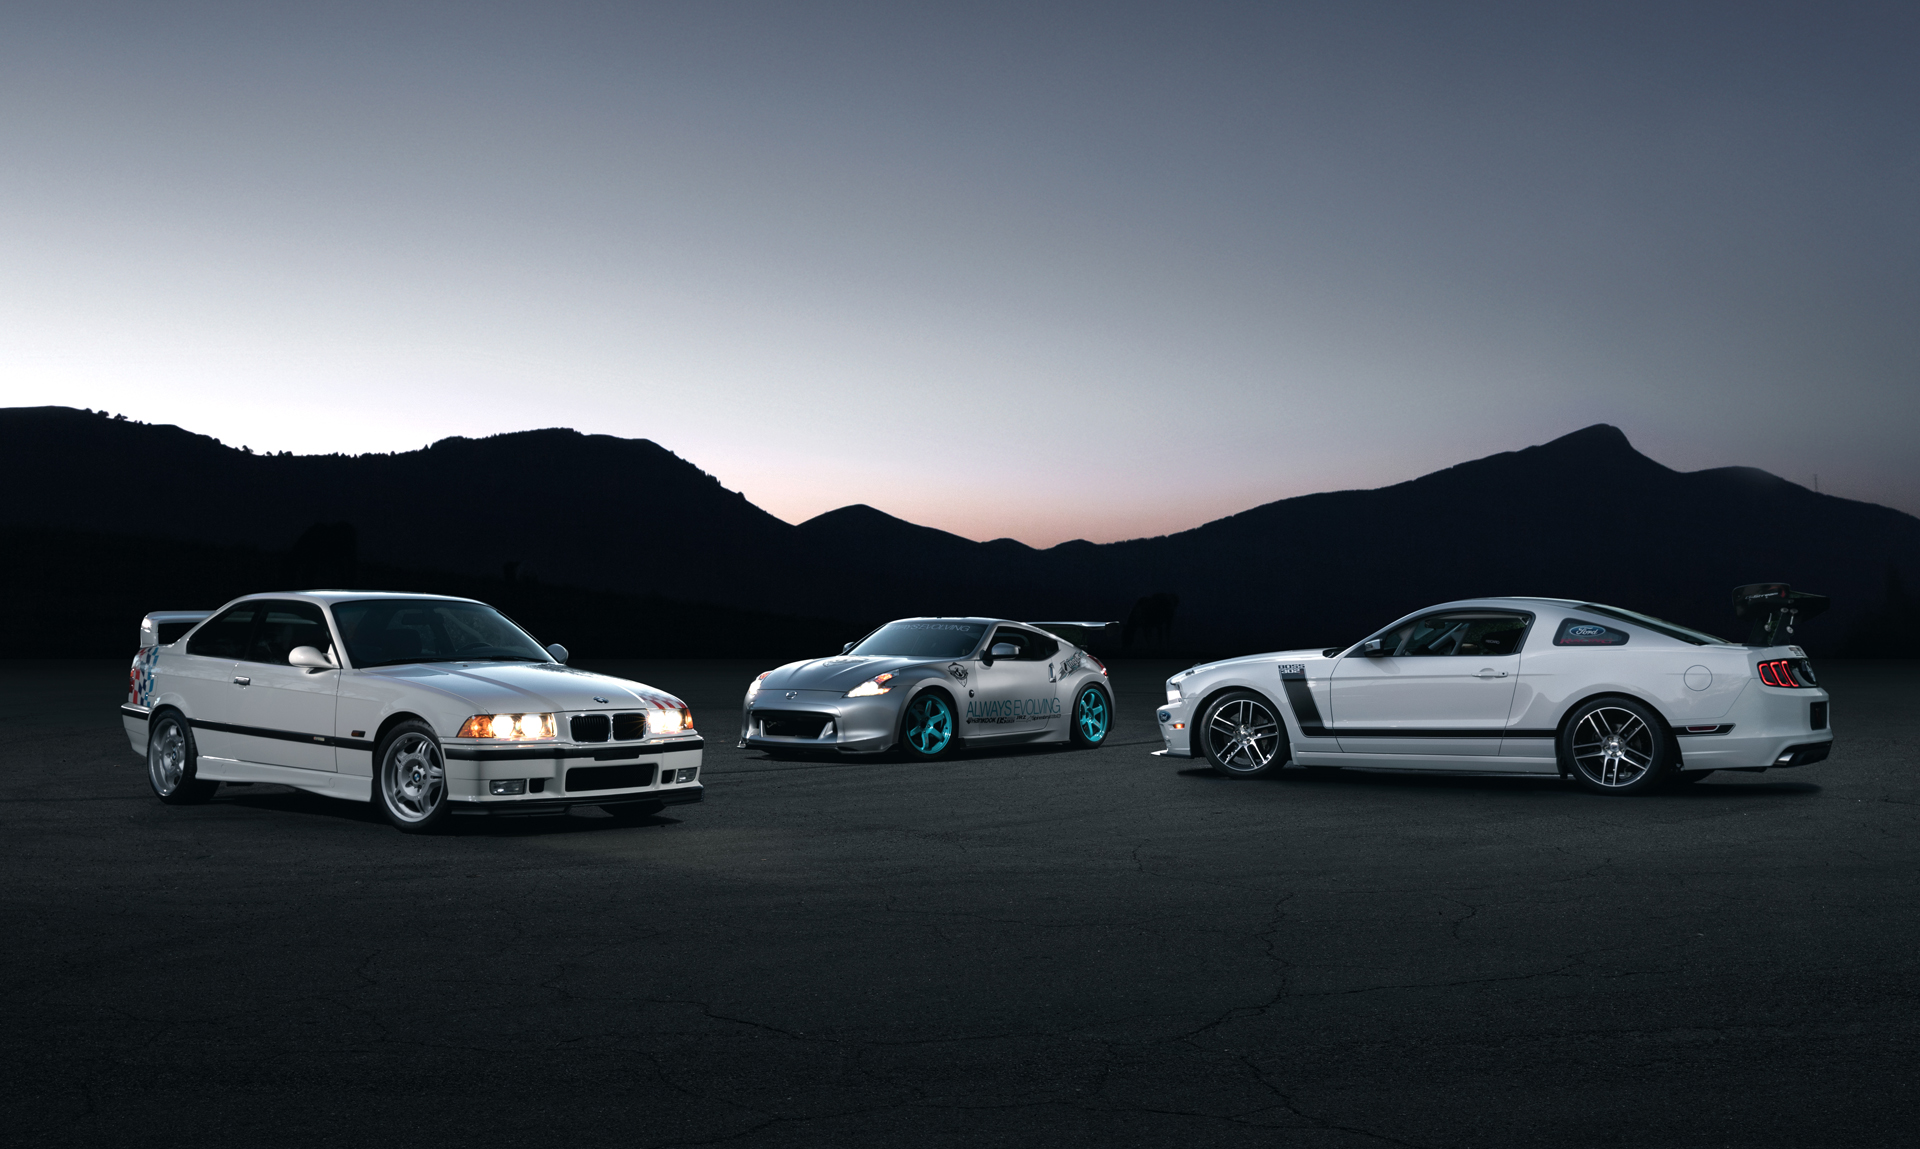 Paul Walker's E36 BMW M3 Lightweights and 13 other cars ...